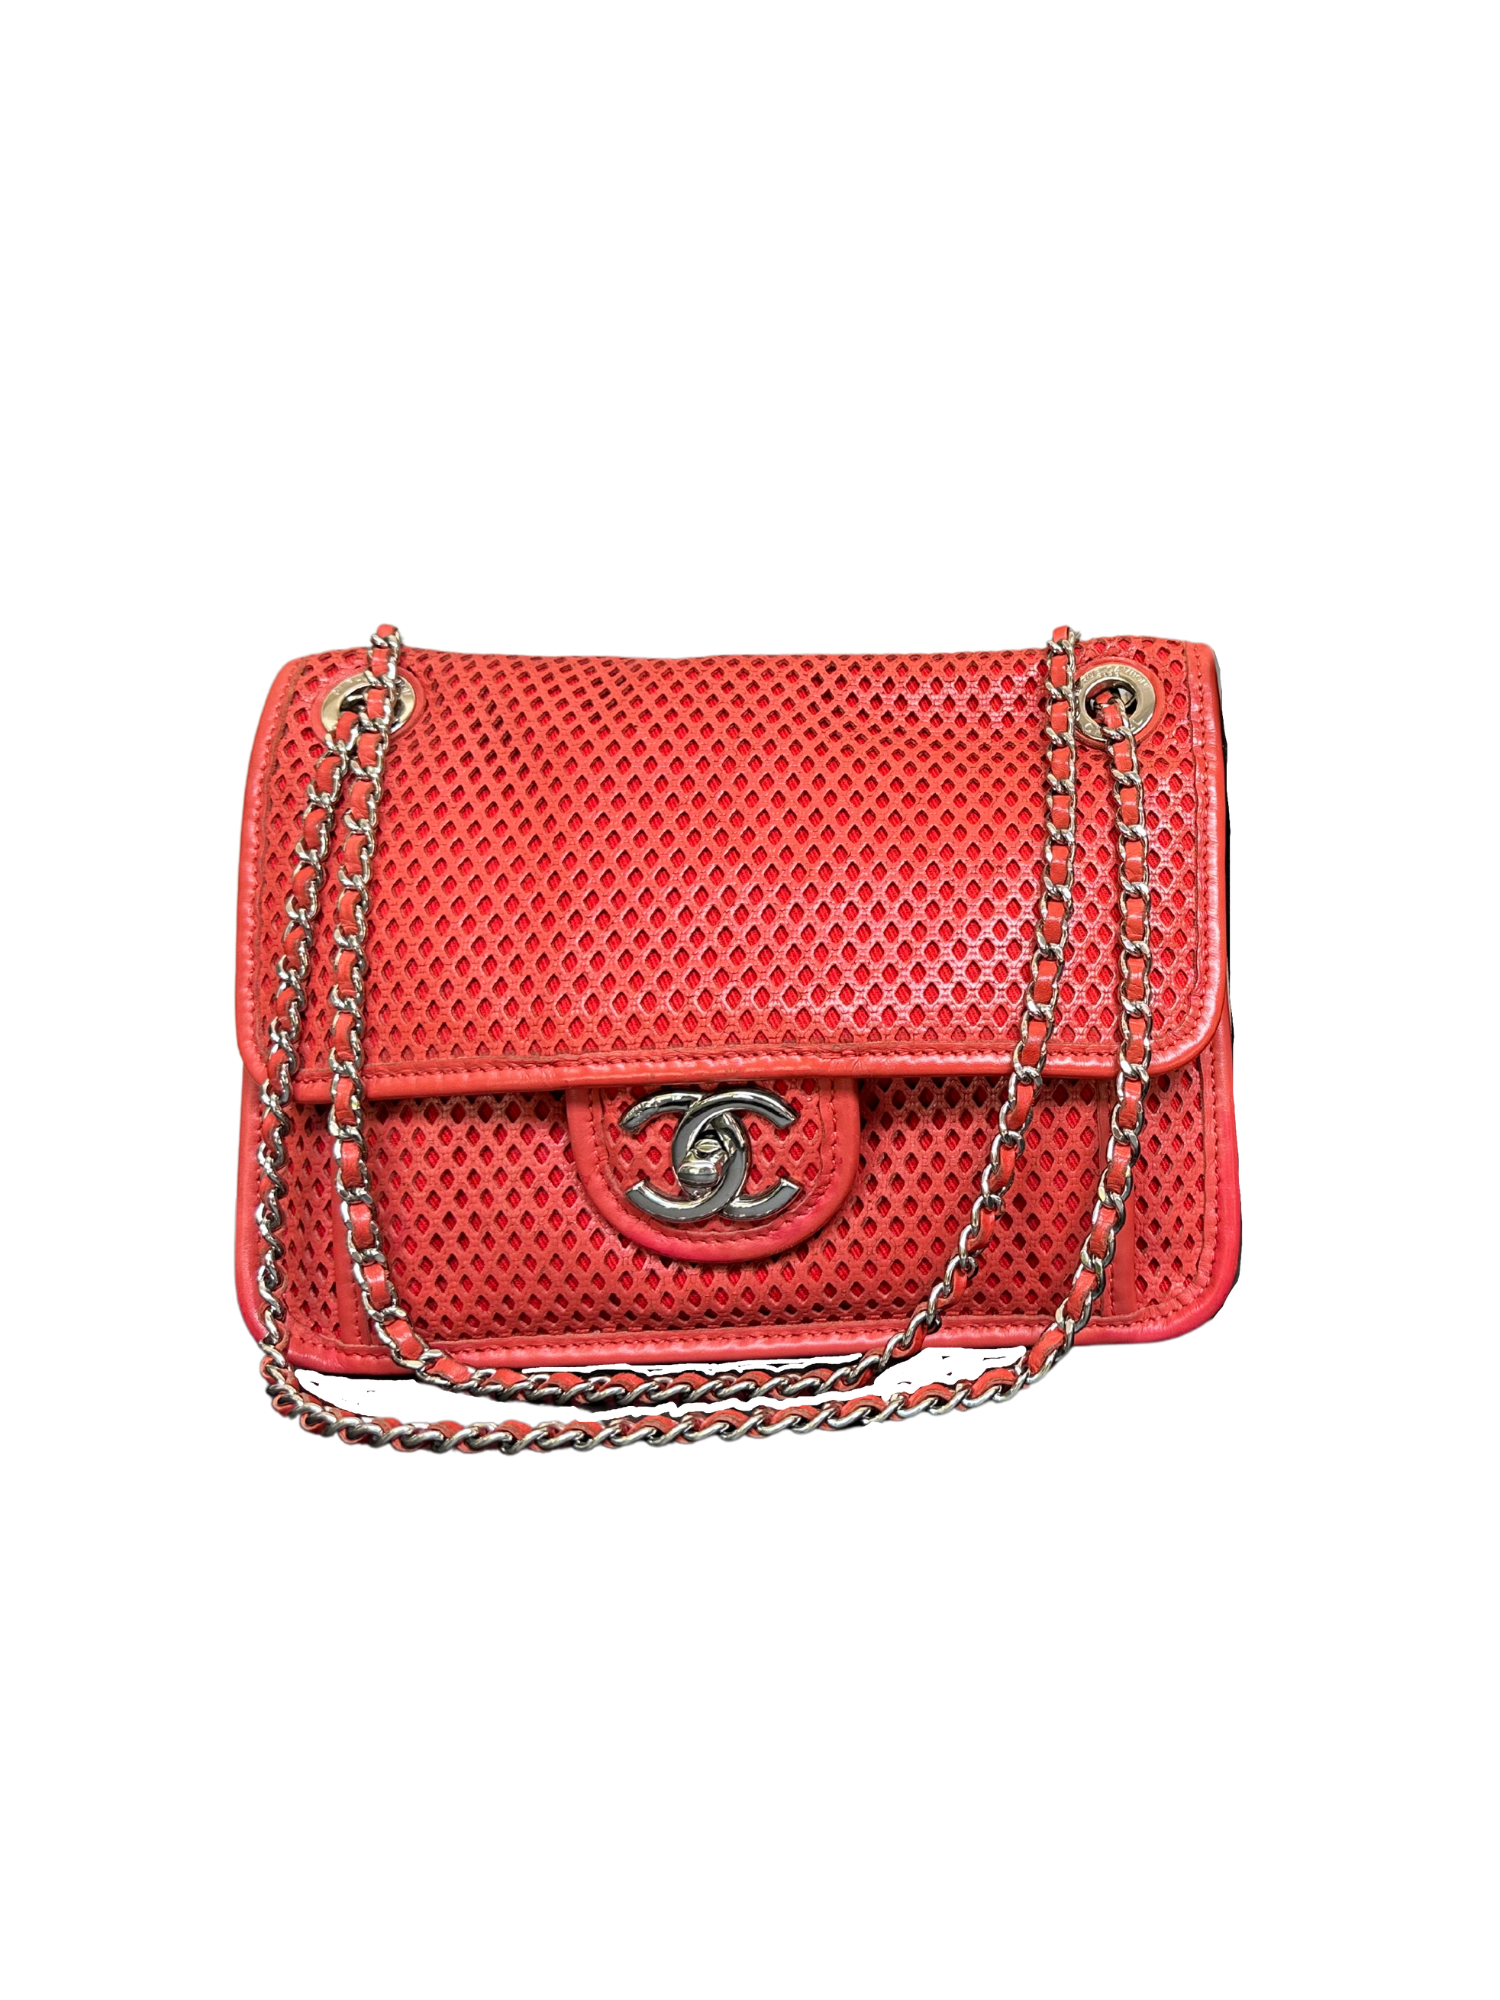 Chanel Red Perforated Leather French Riviera Shoulder Bag